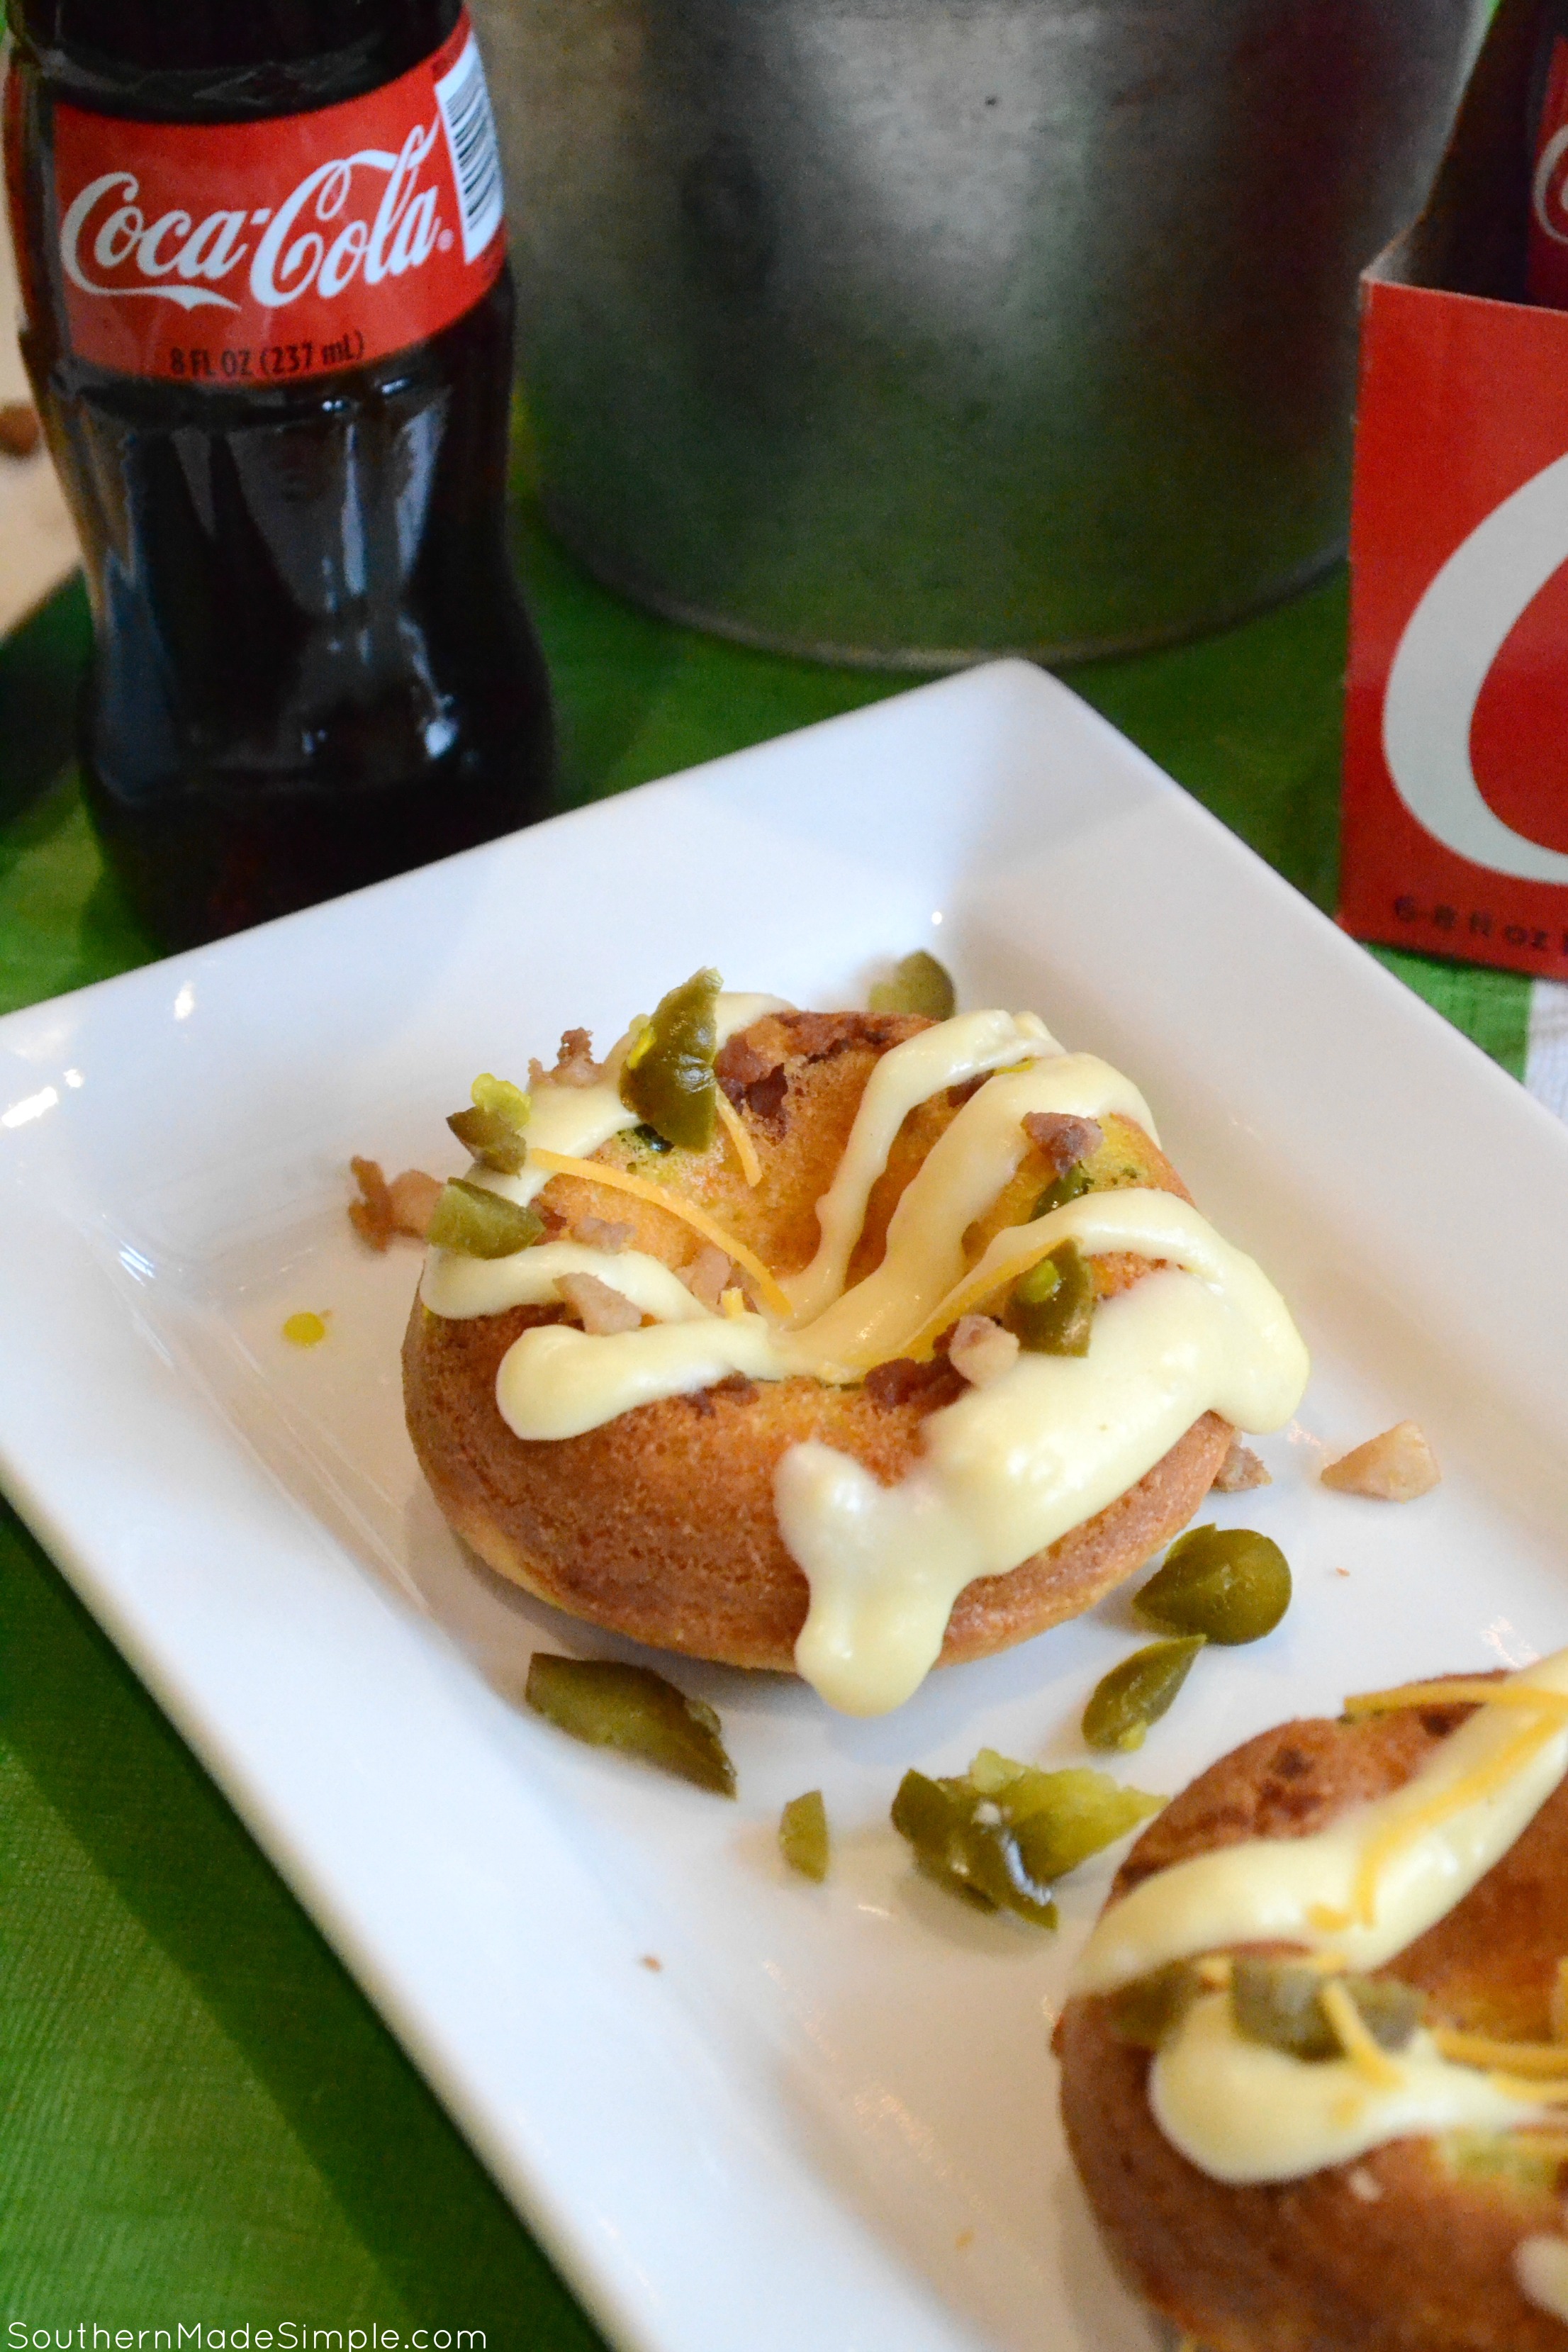 Serve up some spicy goodness during the big game with these savory Cheddar Bacon Jalapeno Doughnuts! They're a cheesy cornbread base with a spicy jalapeno cheese sauce that is in a league of it's own! Pair it with an ice cold Coca-Cola and you've got a winning hand! #ServeWithACoke #BowlGames #CollectiveBias